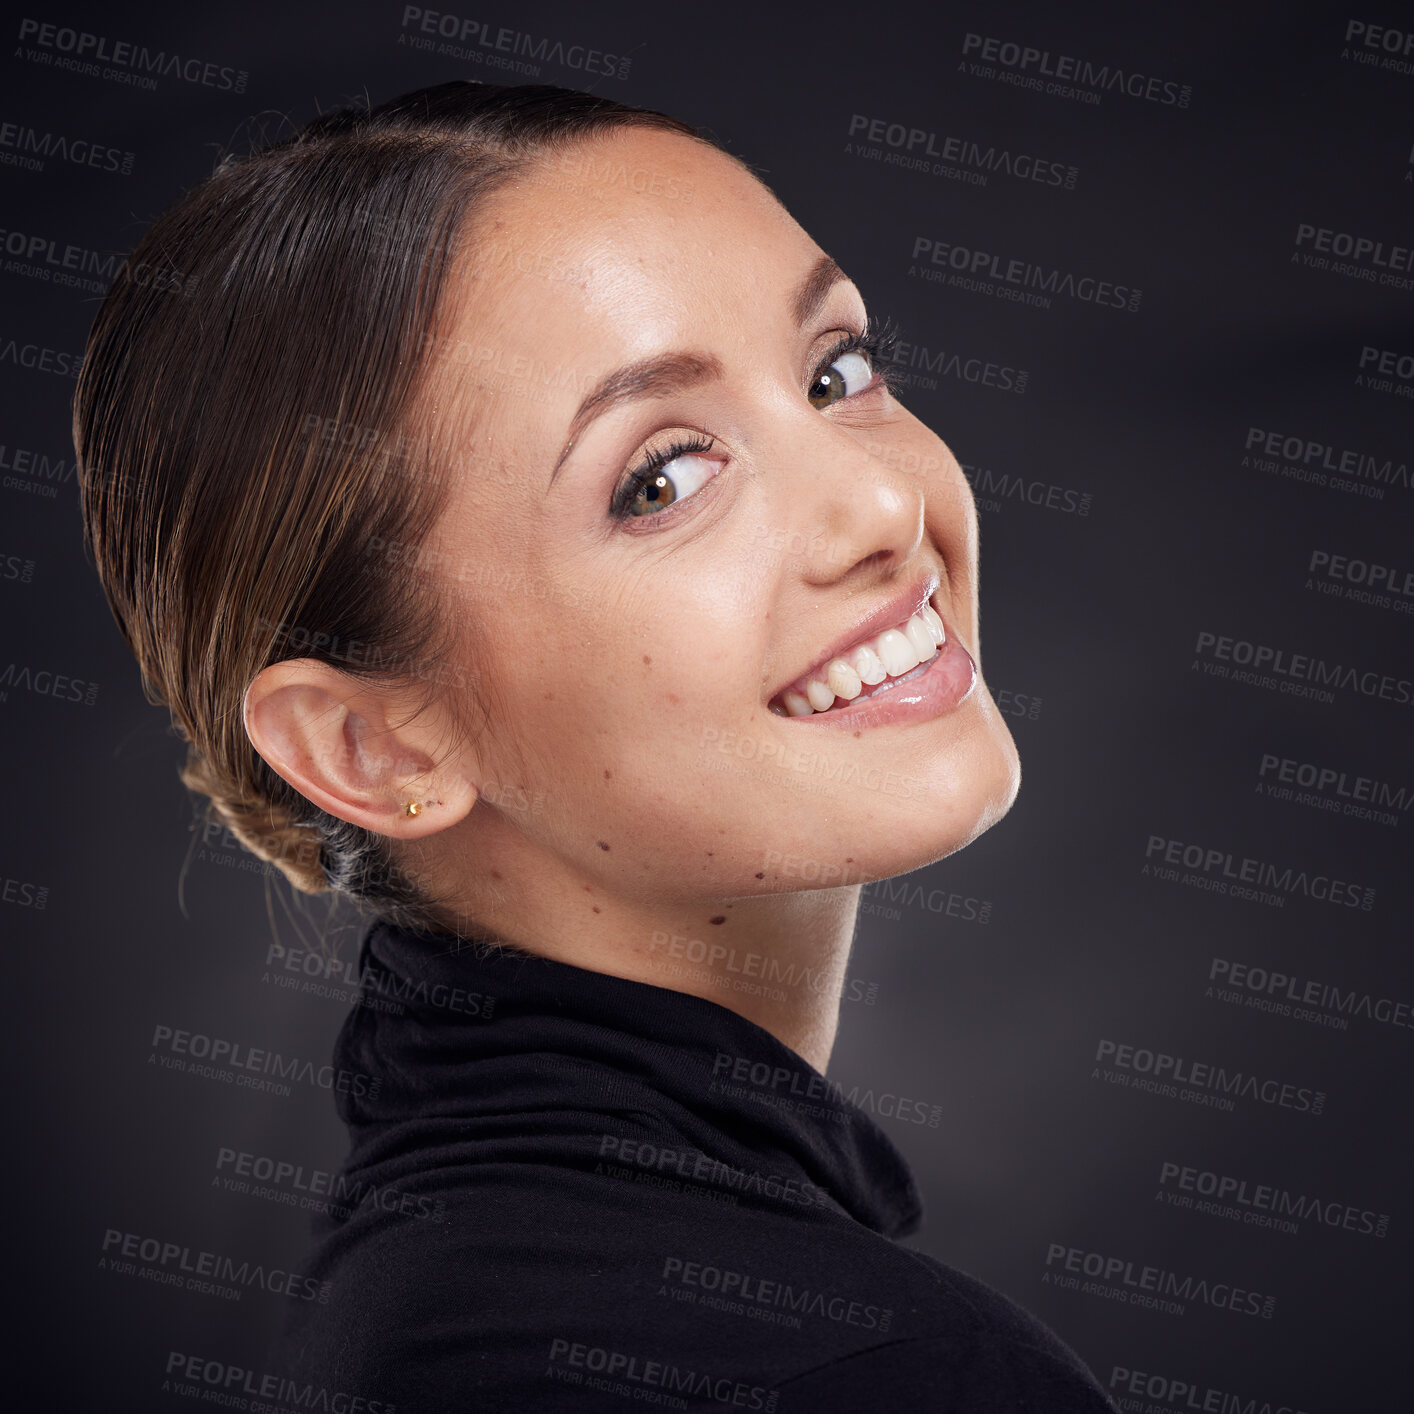 Buy stock photo Skincare, portrait or woman in studio with a happy smile after facial grooming routine isolated on black background. Beauty glow, face or girl model smiling with marketing or advertising mockup space